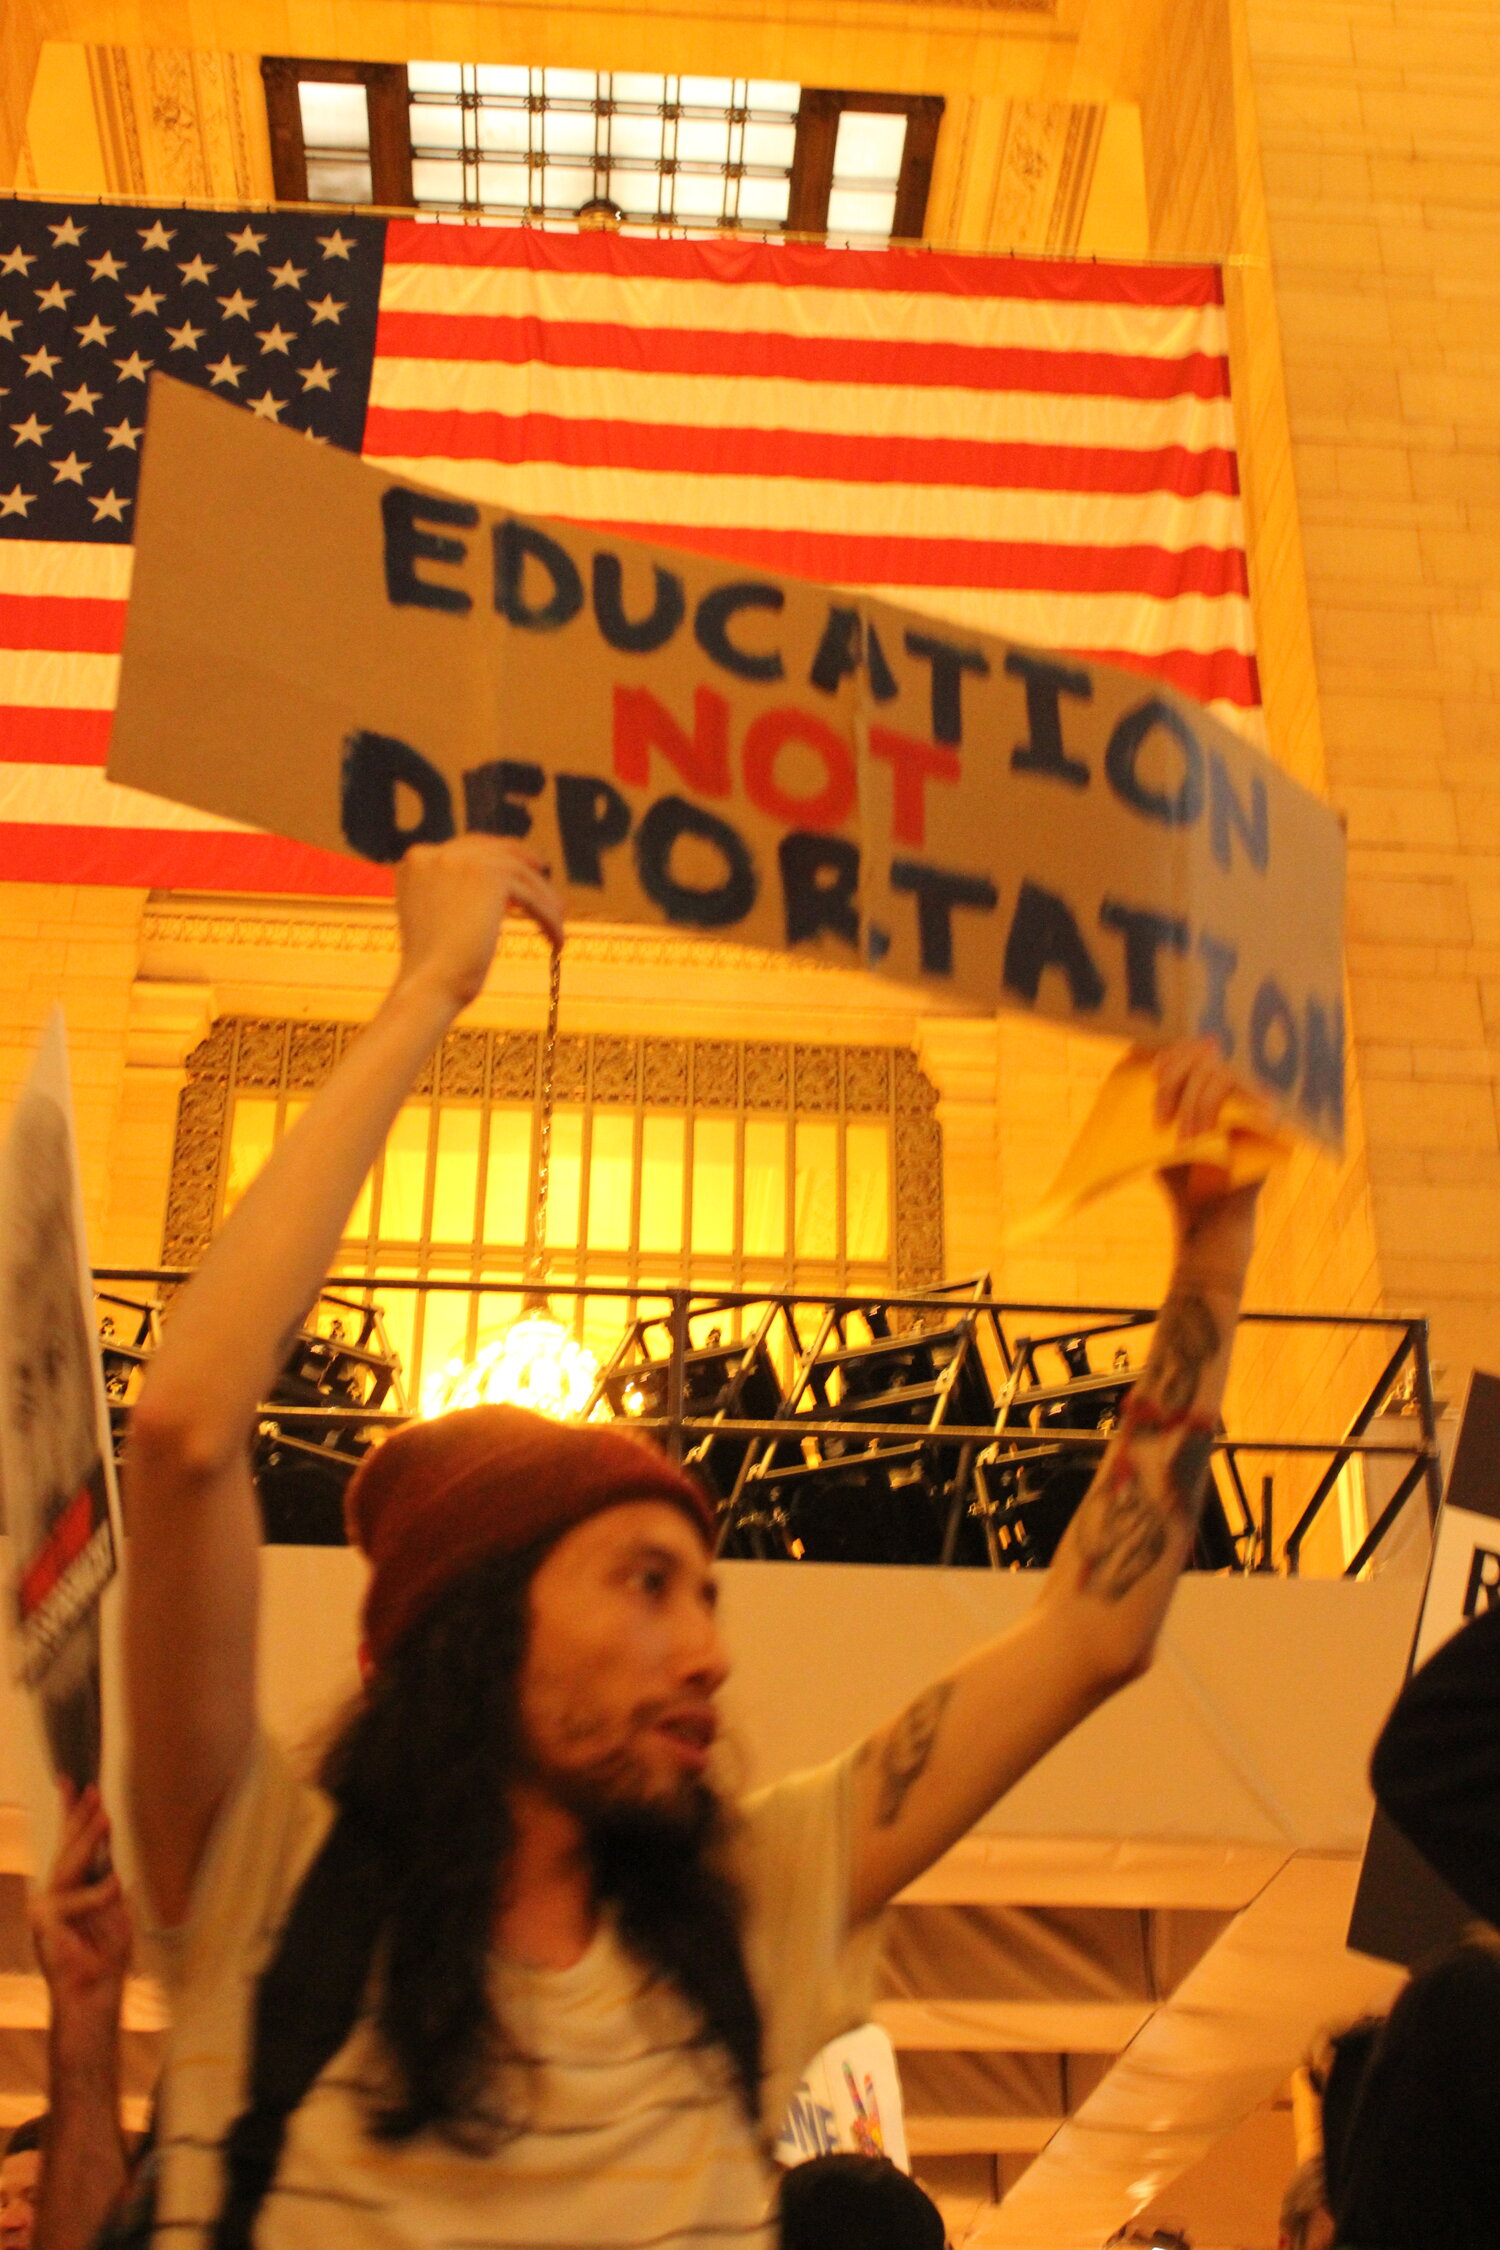 photo of aperson holding a protest sign that reads "Education Not Deportation"